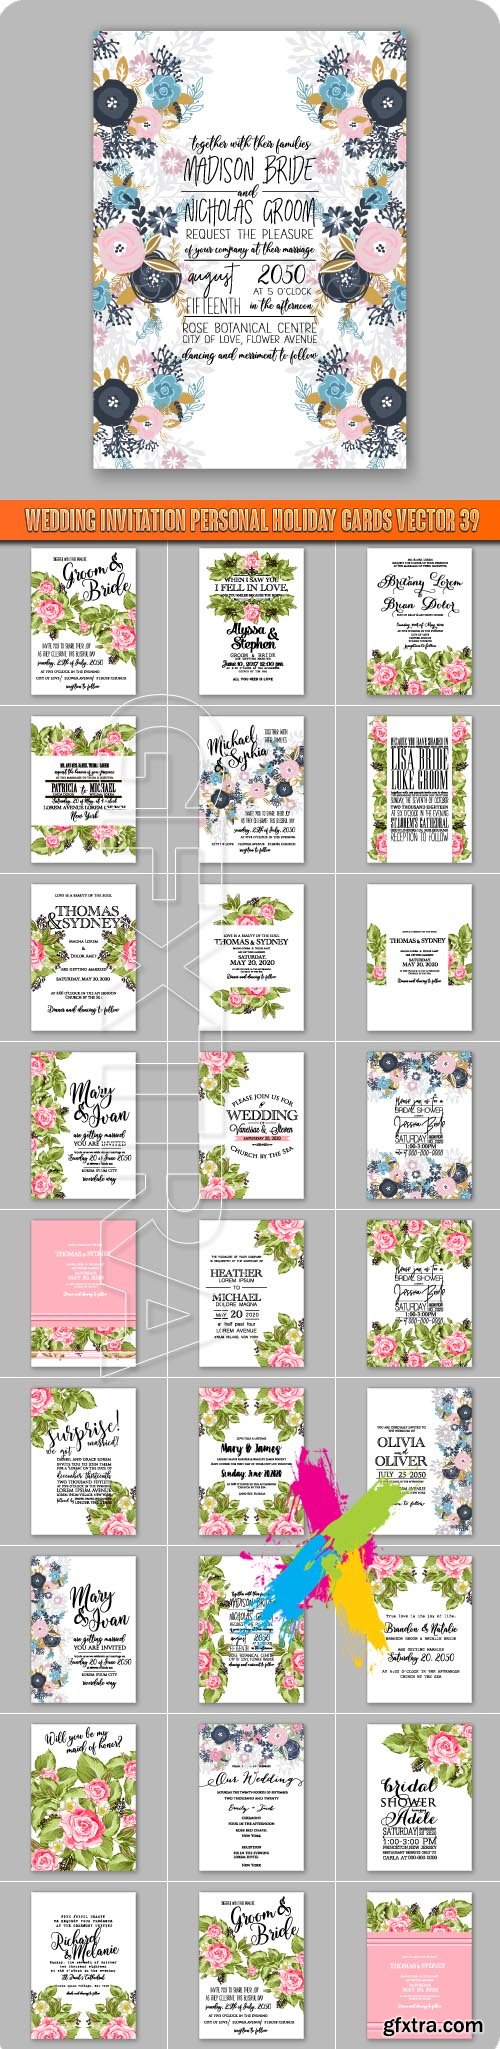 Wedding invitation personal holiday cards vector 39